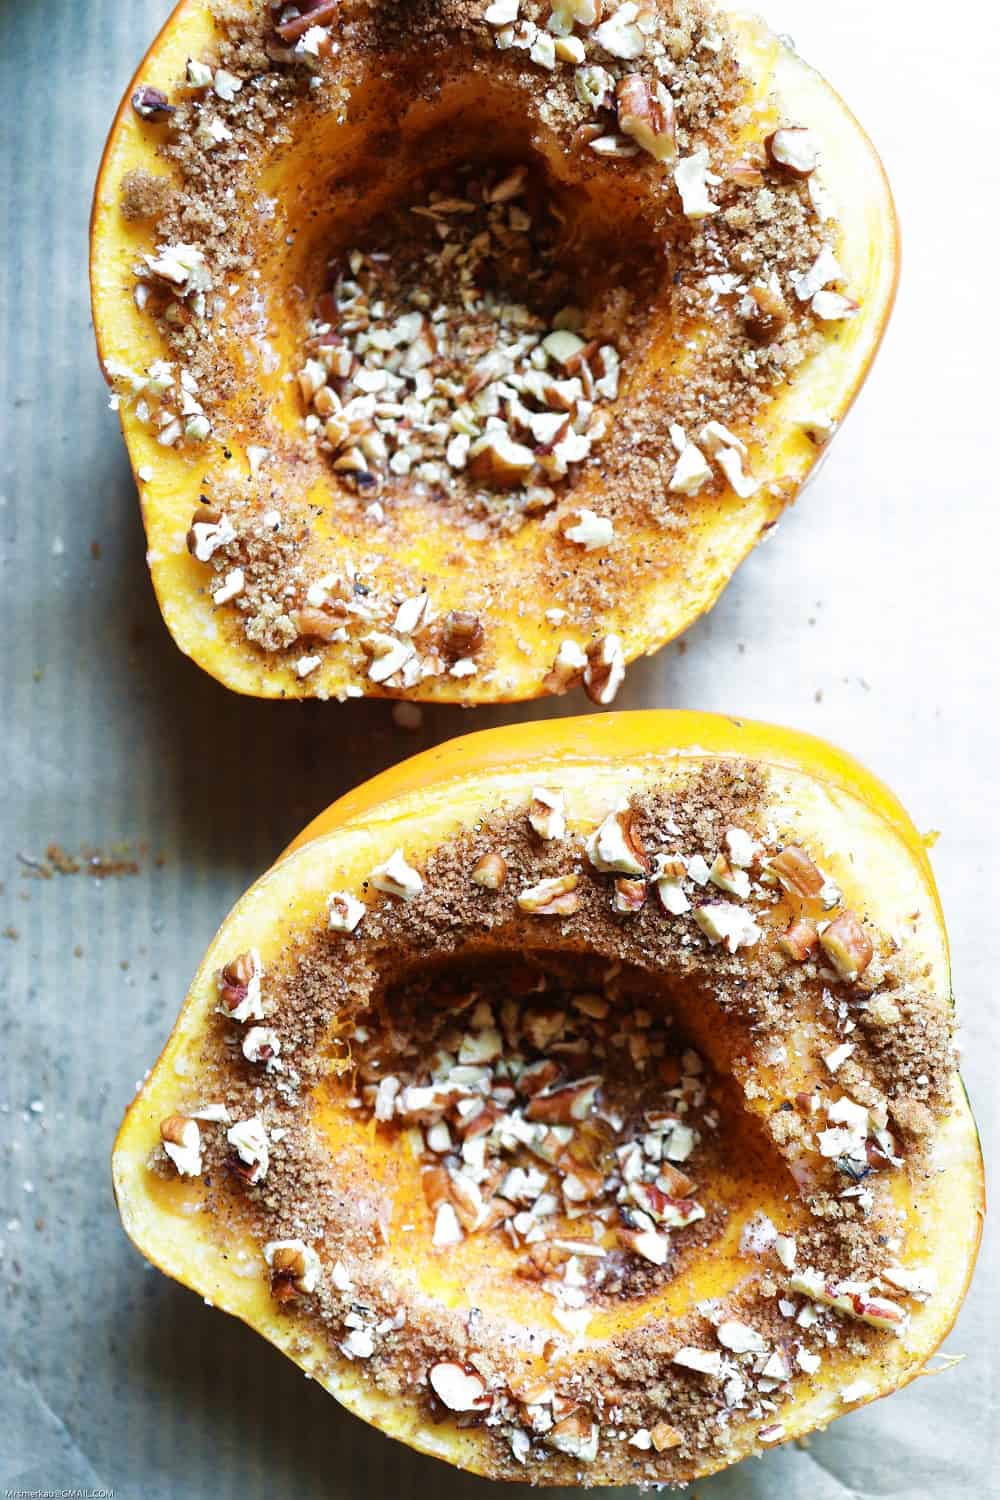 Acorn squash sprinkled with sugar and pecans